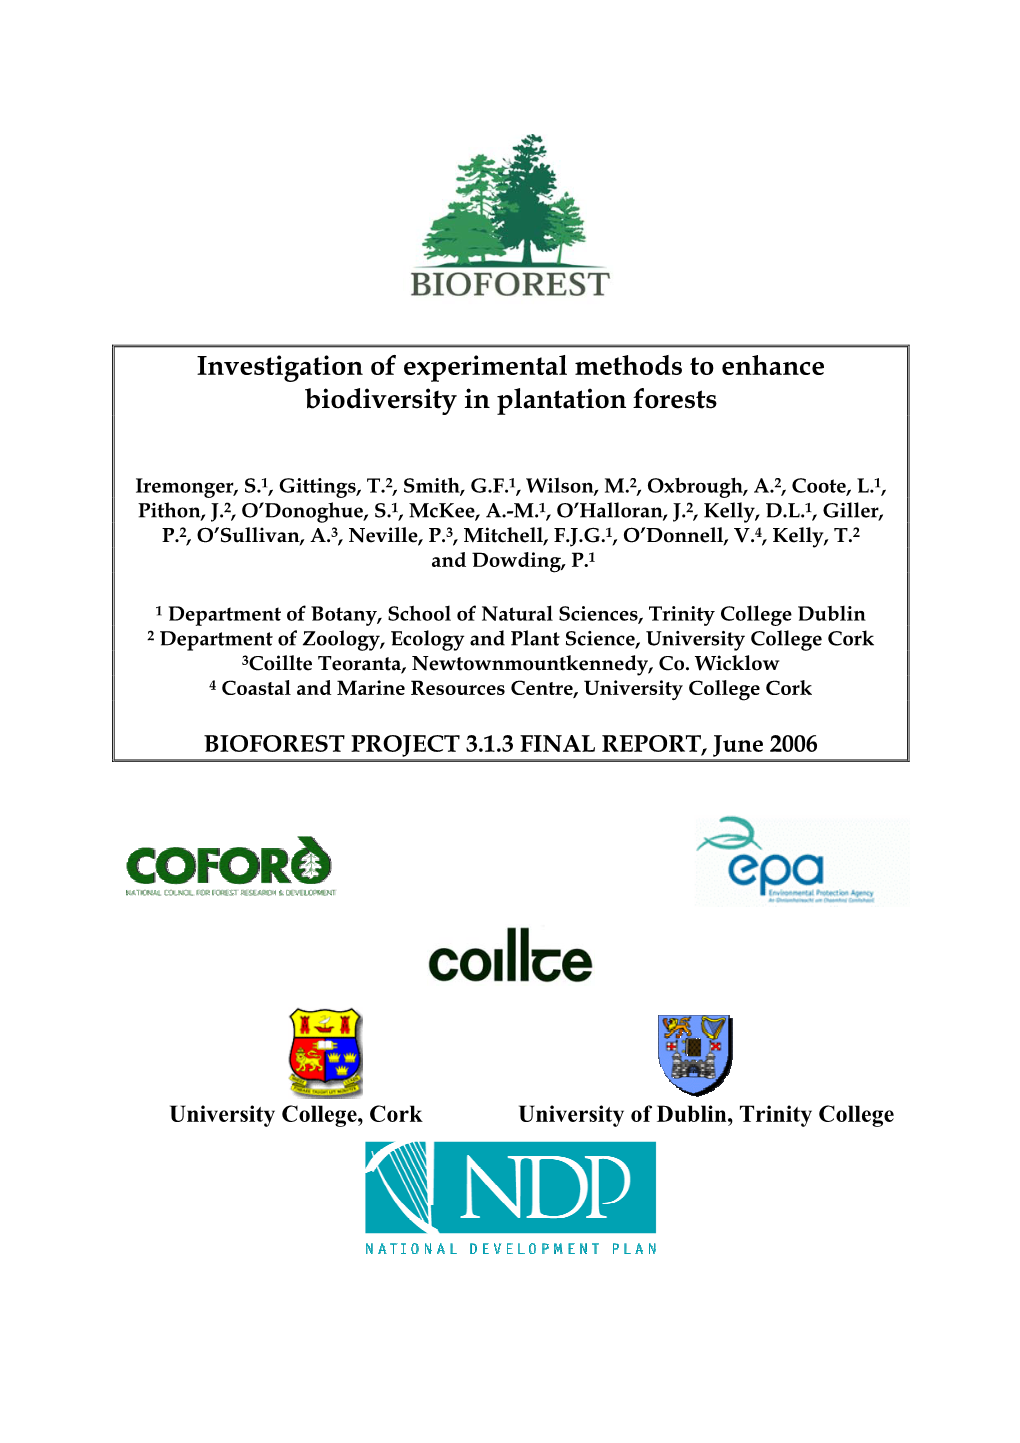 Investigation of Experimental Methods to Enhance Biodiversity in Plantation Forests